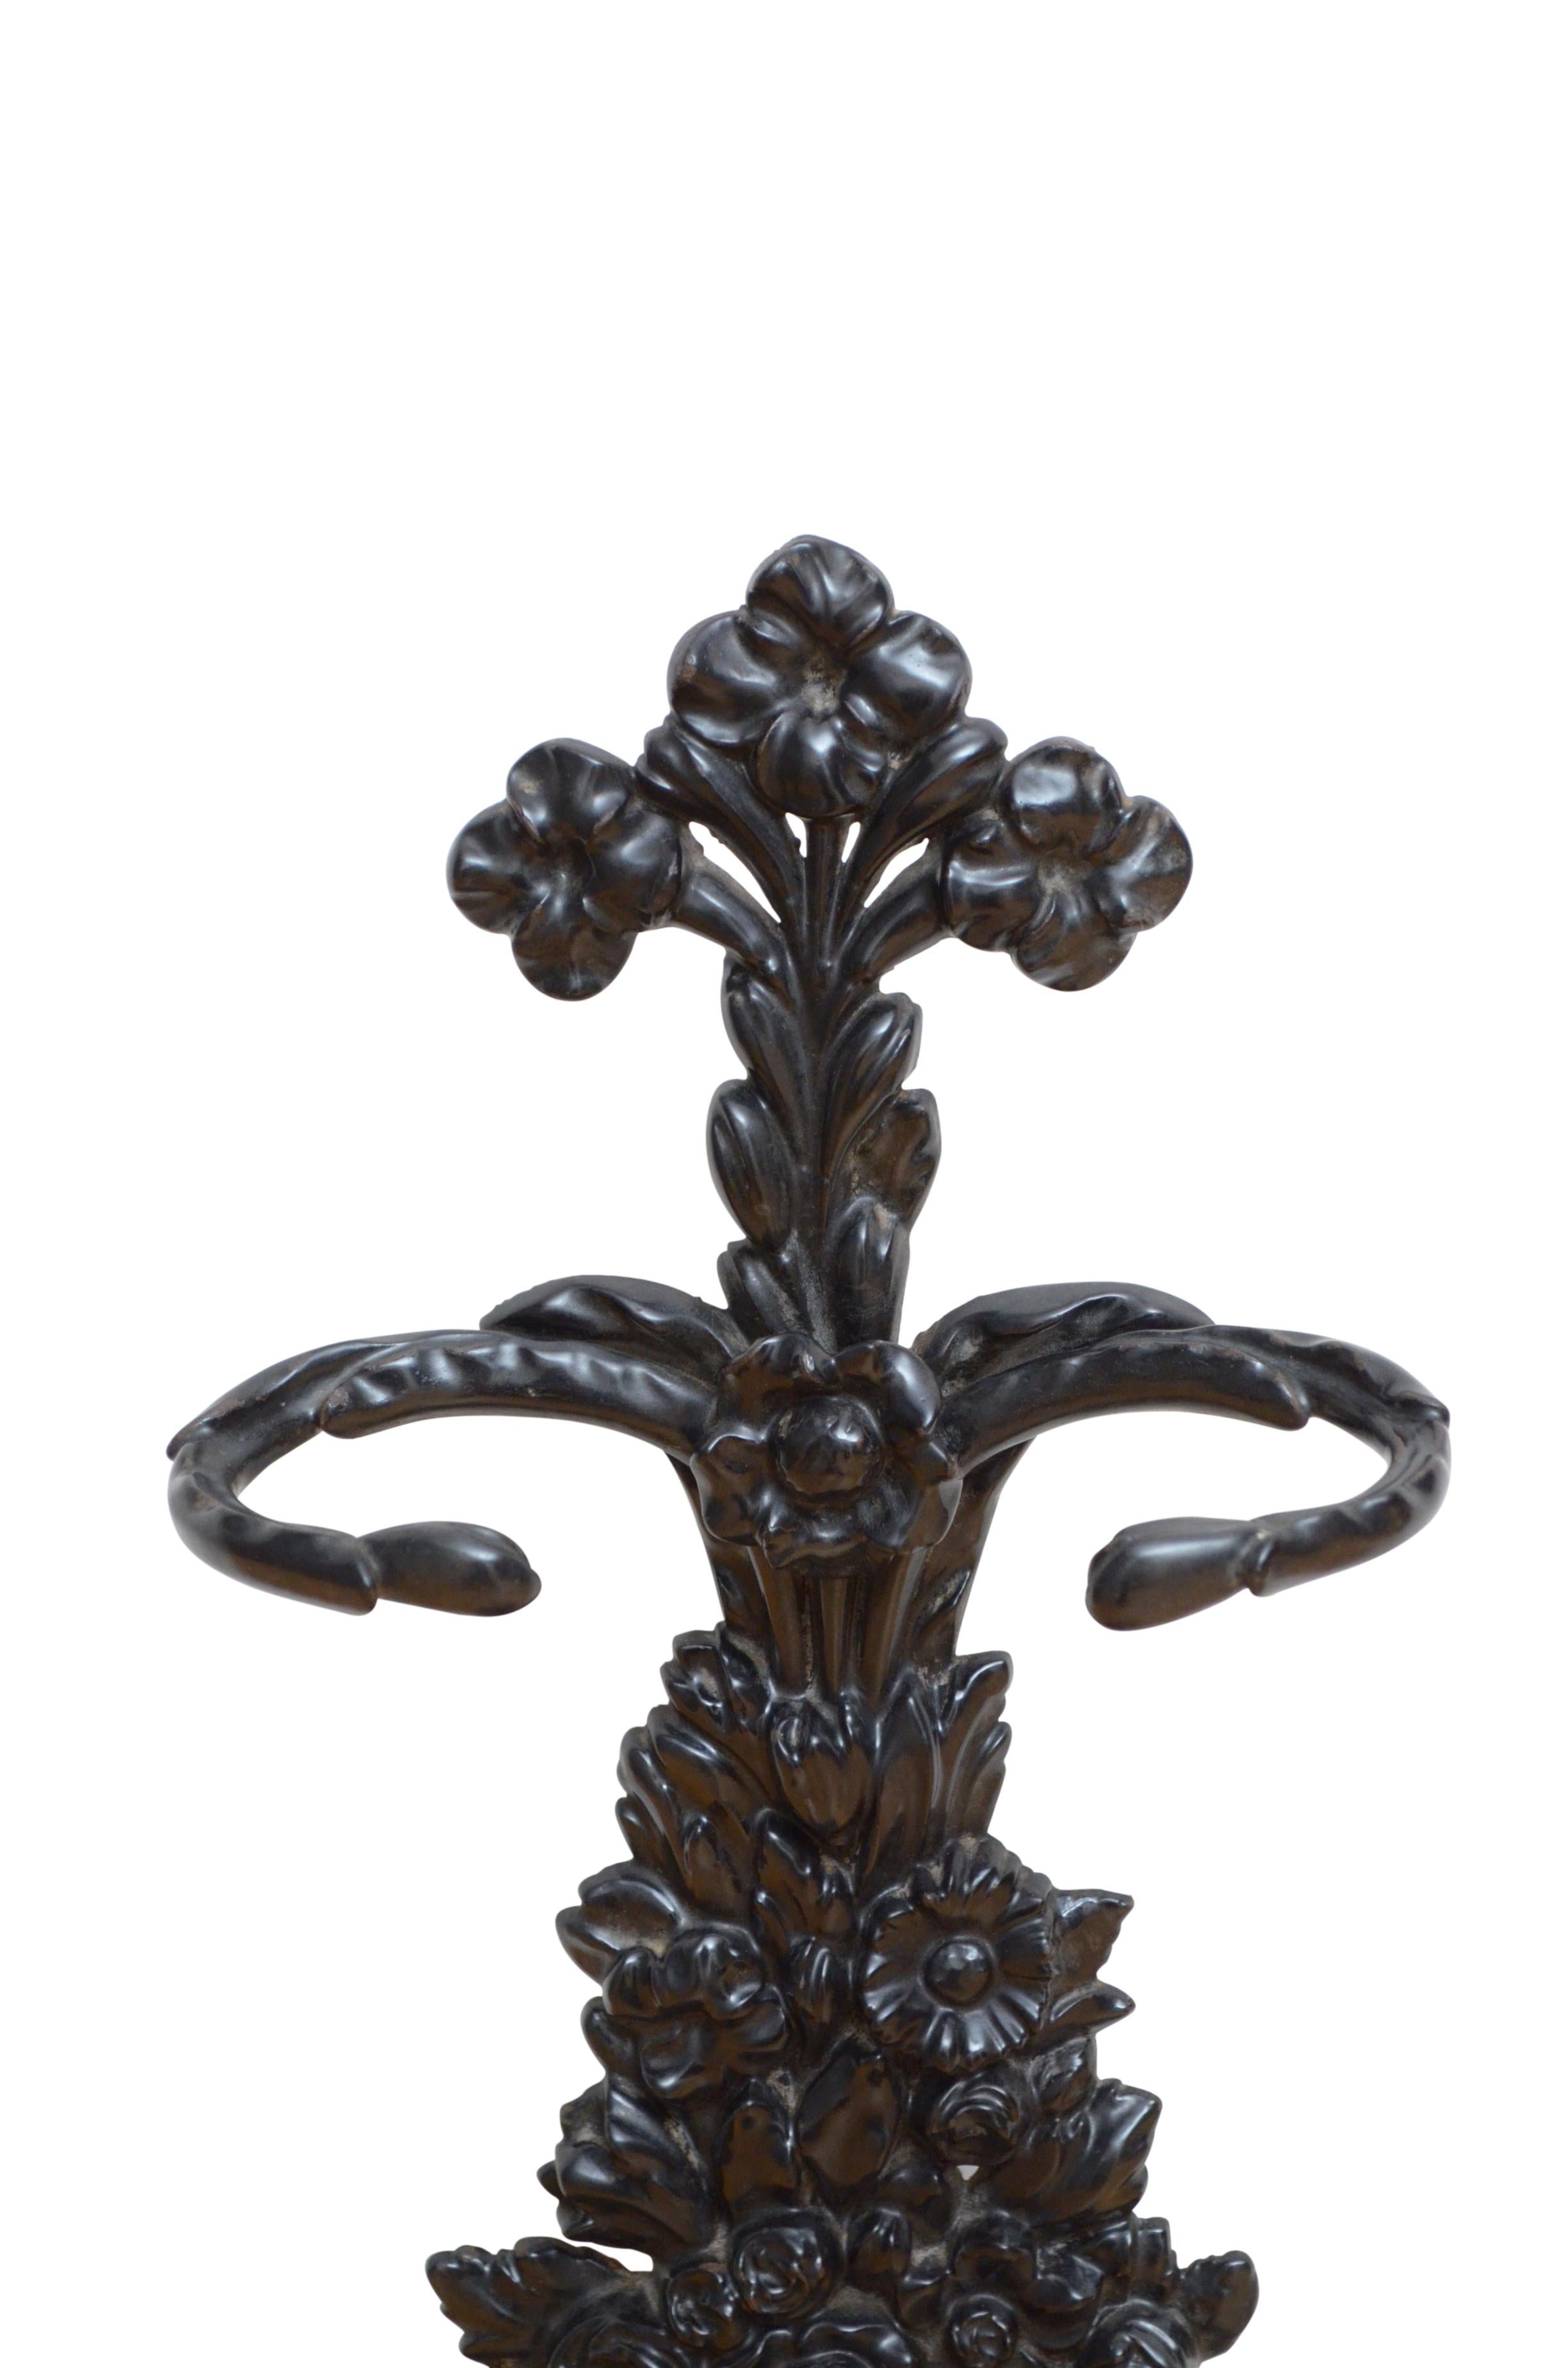 Attractive French cast iron umbrella stand or walking stick stand in black with floral motifs through. This umbrella stand would make a good fire iron stand, circa 1950.
Measures: H 24.5